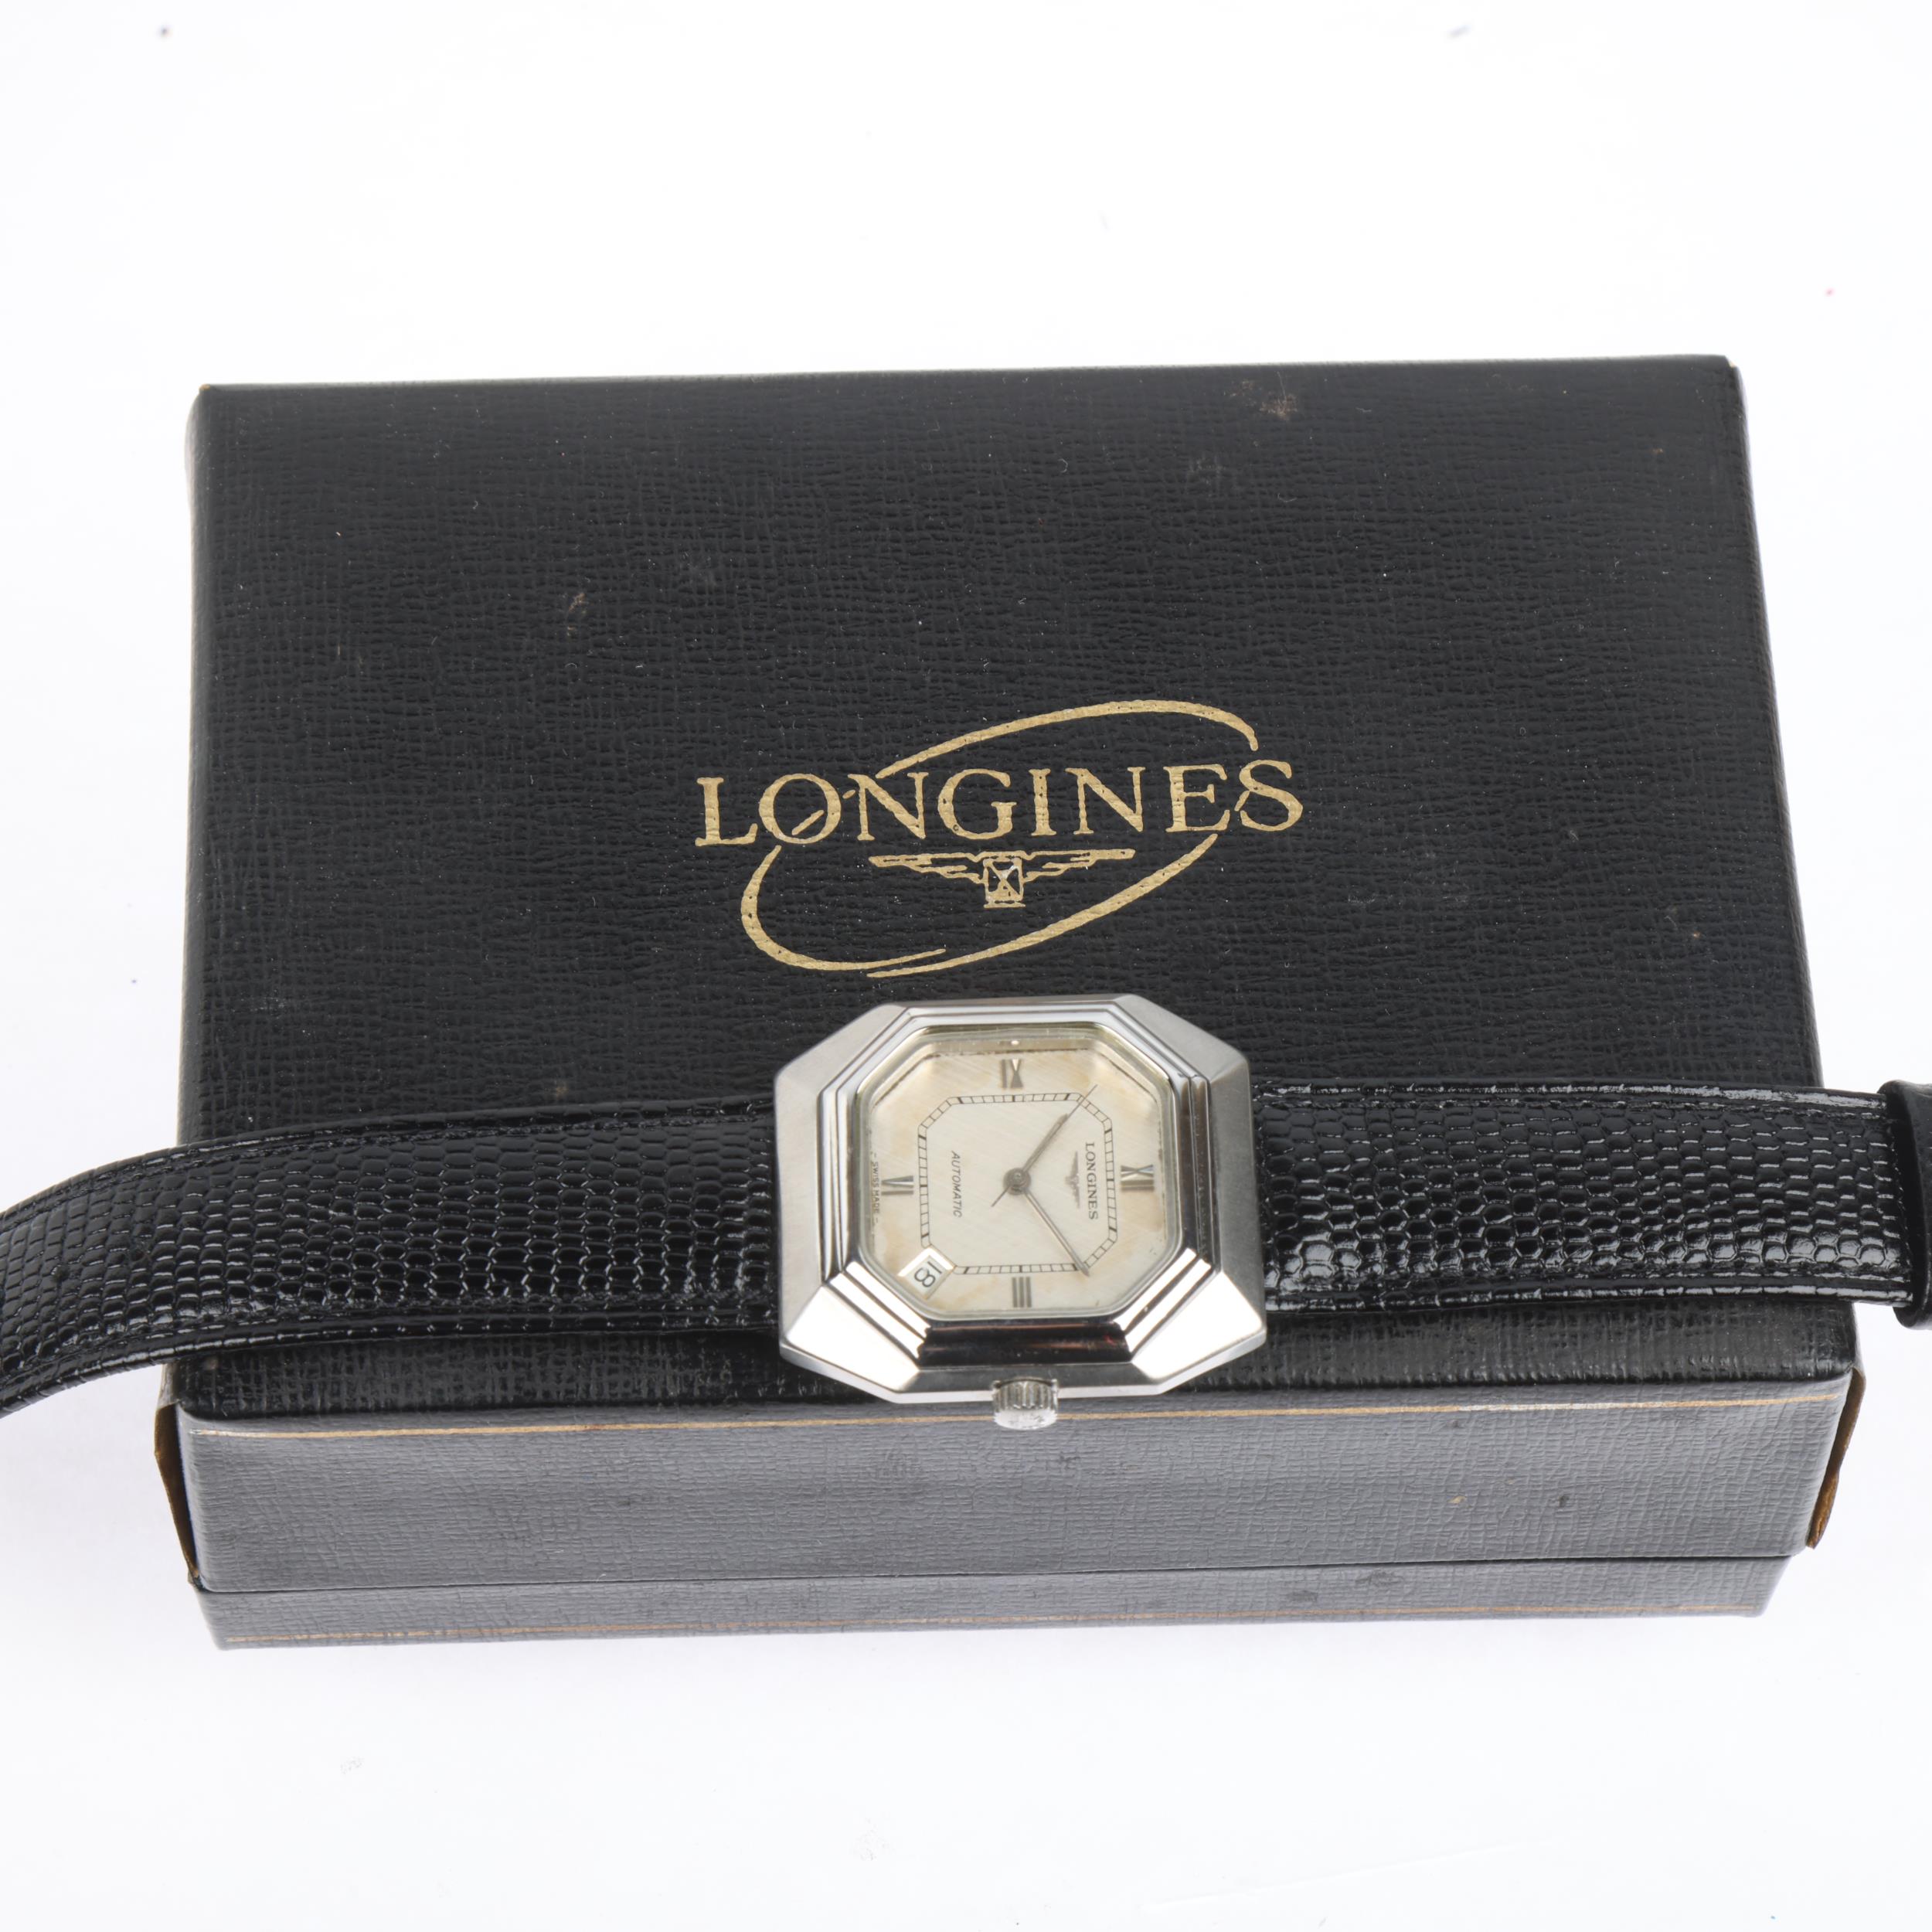 LONGINES - a Vintage stainless steel automatic calendar wristwatch, ref. 4817-4 633, circa 1960s, - Image 5 of 5